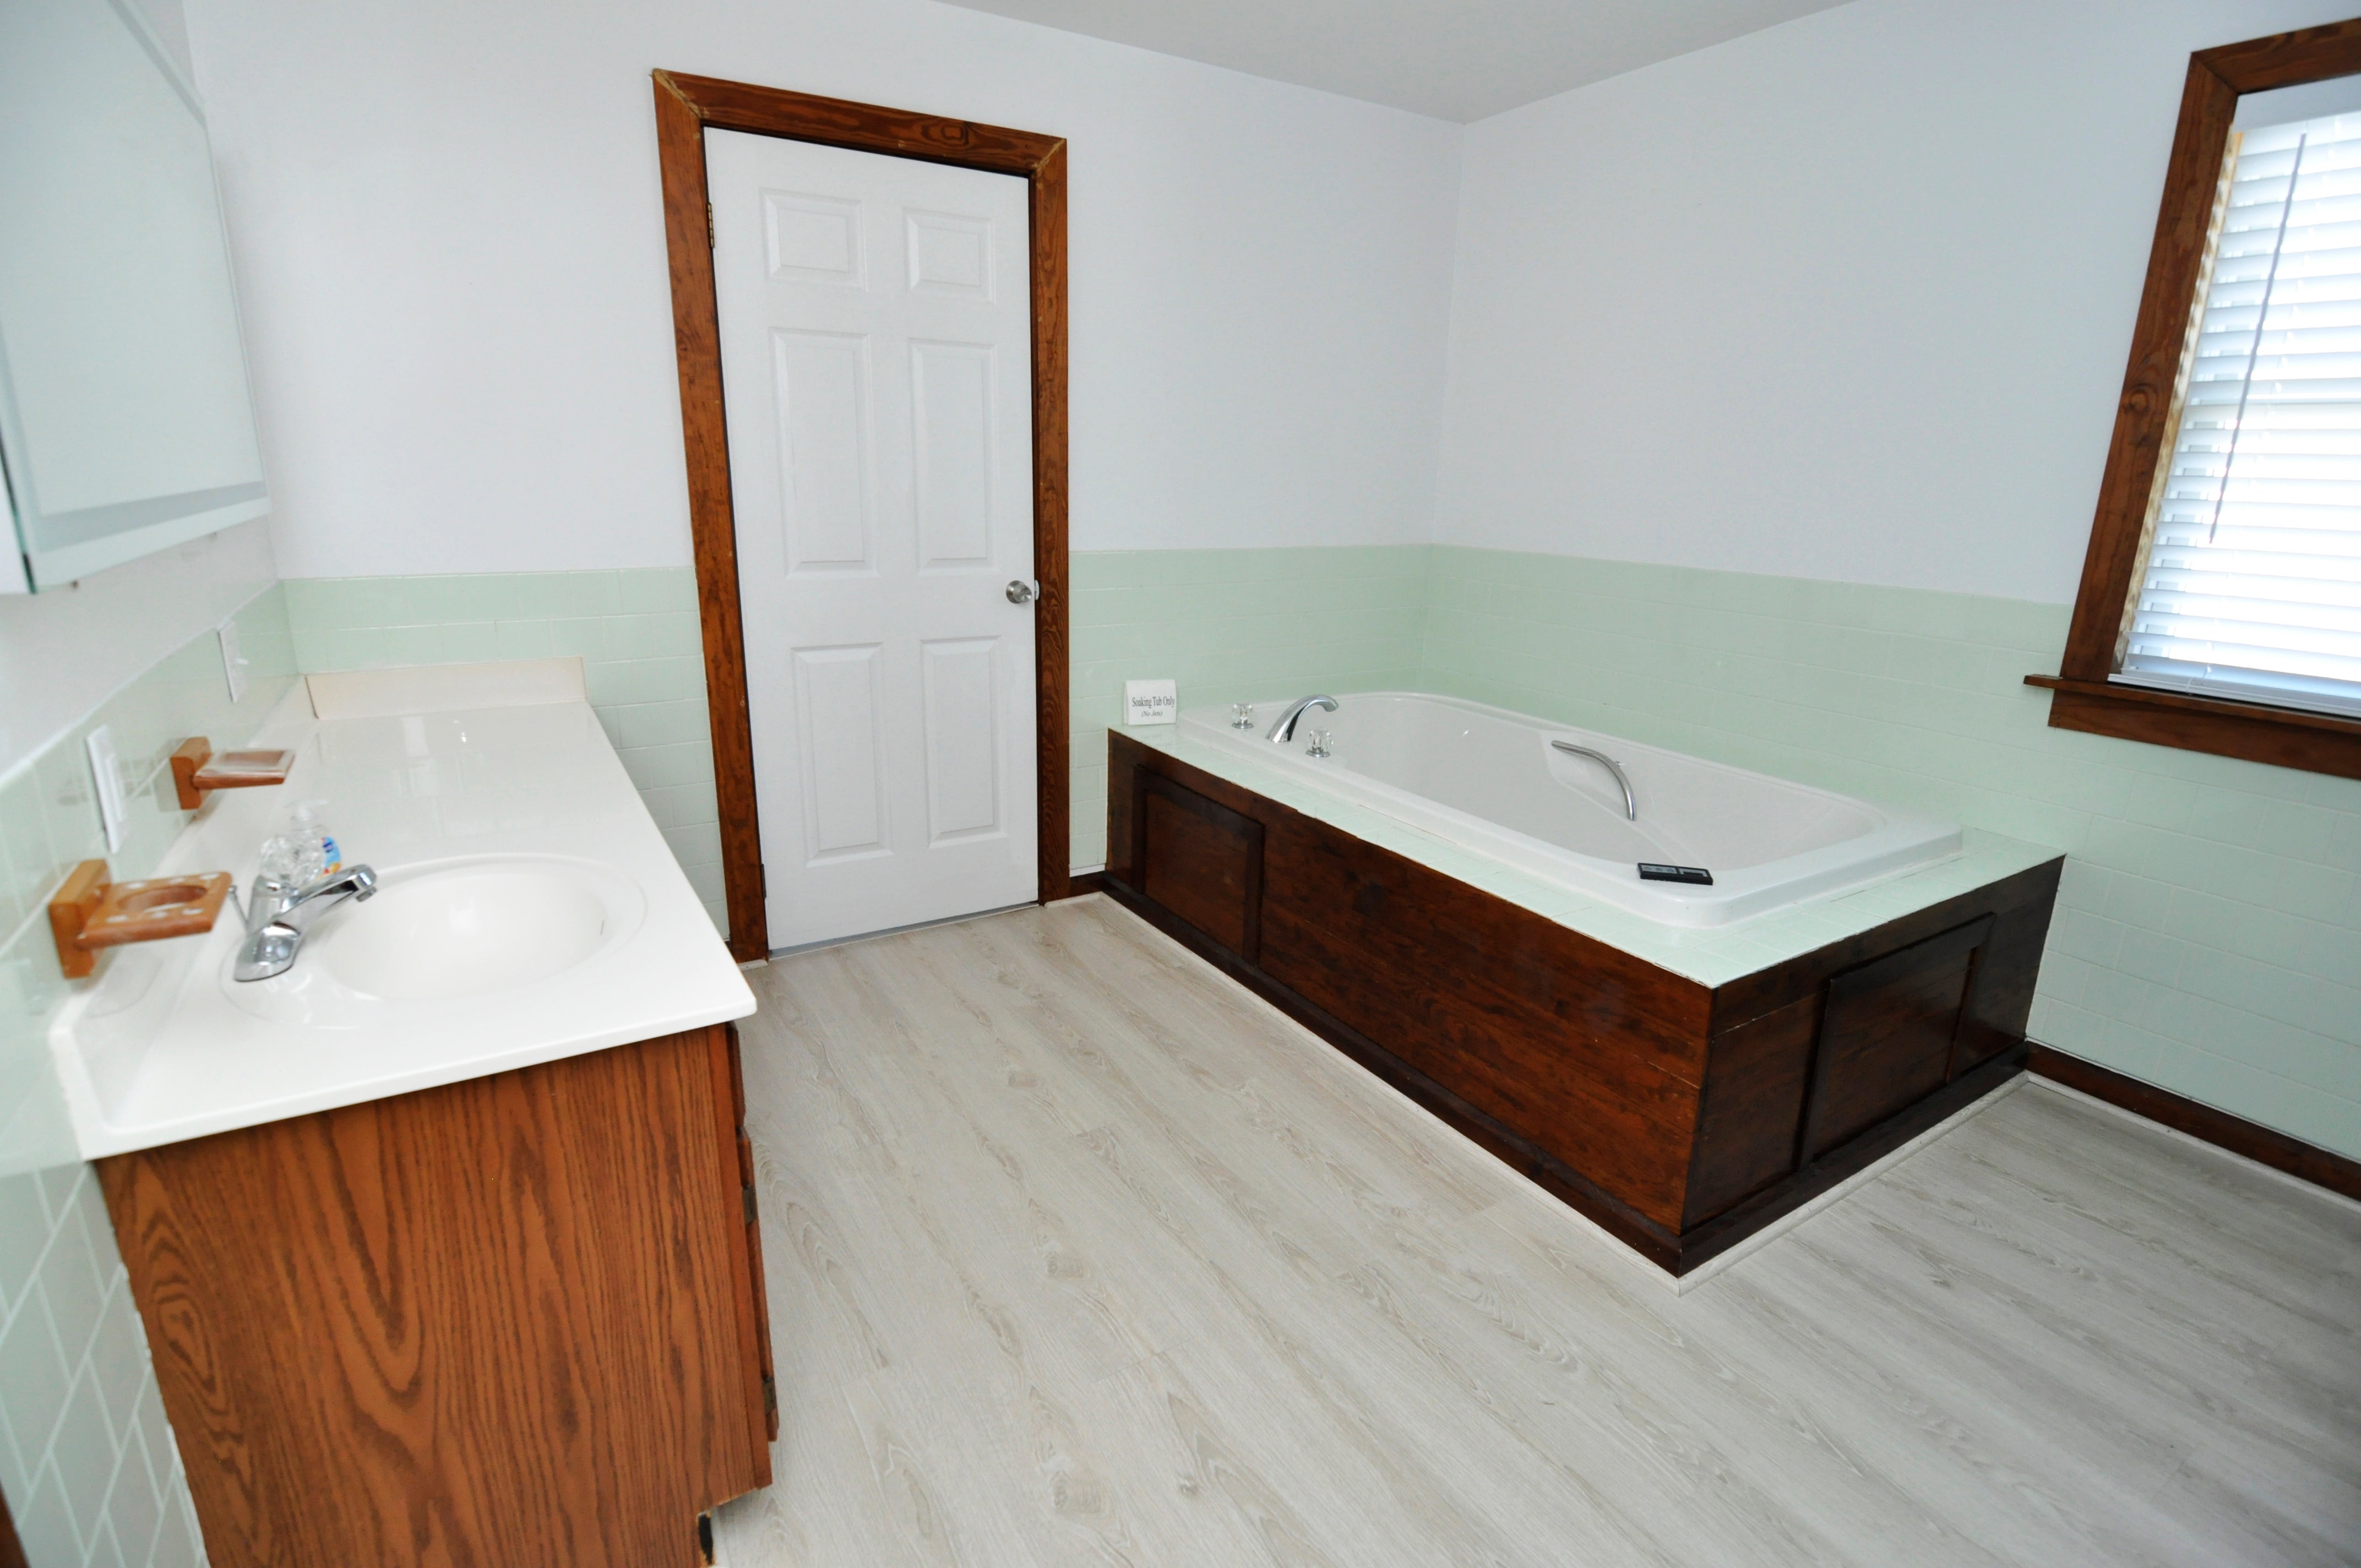 Primary Bath with Soaking Tub and Separate Shower